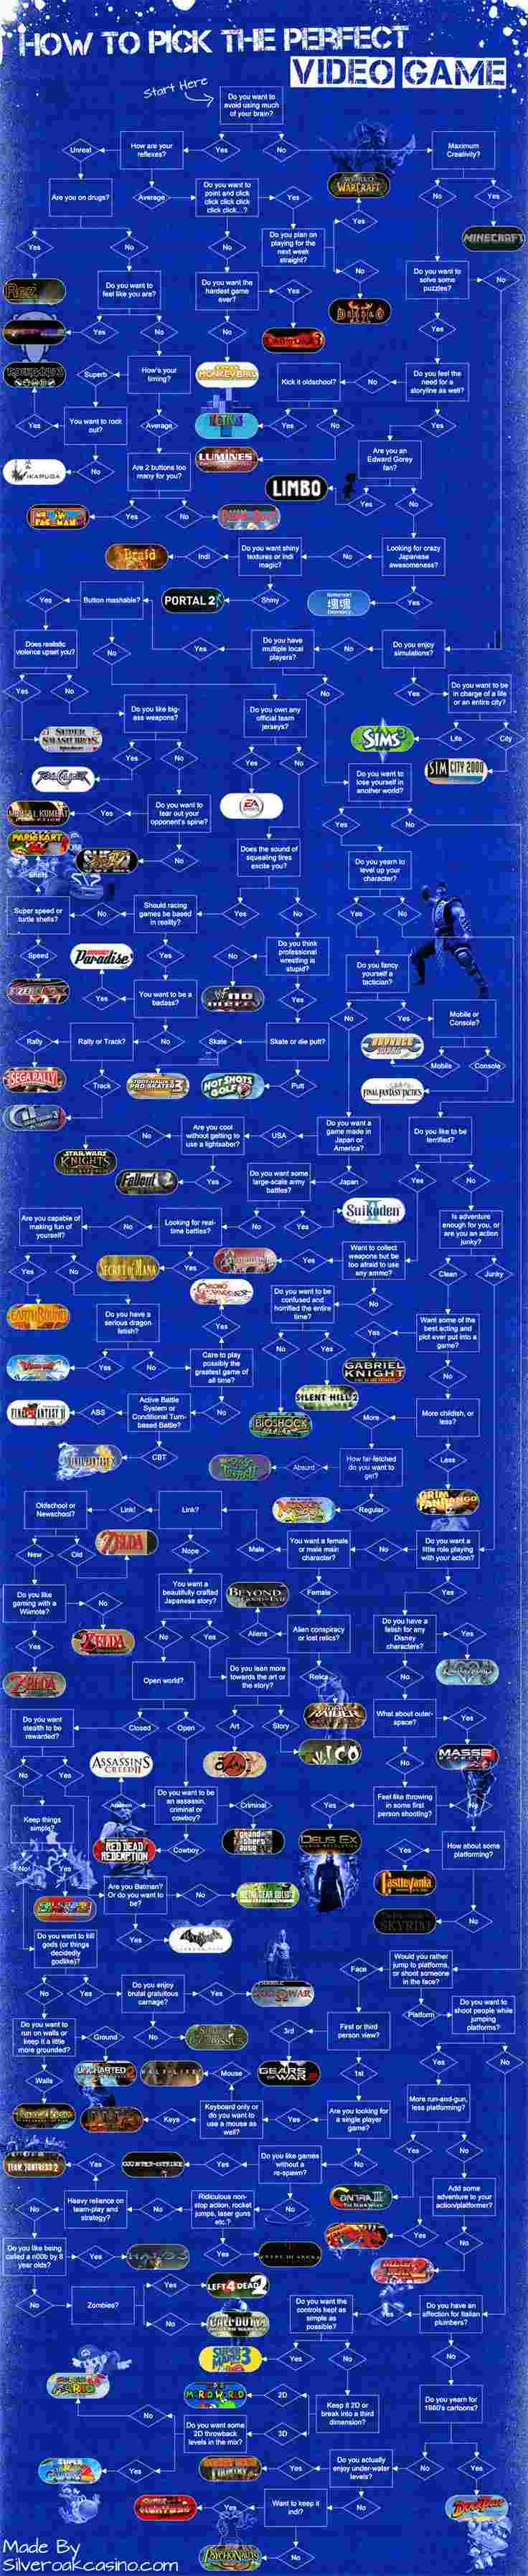 HOW TO PICK THE PERFECT VIDEO GAME (a super long flowchart....) 9nbjkn10